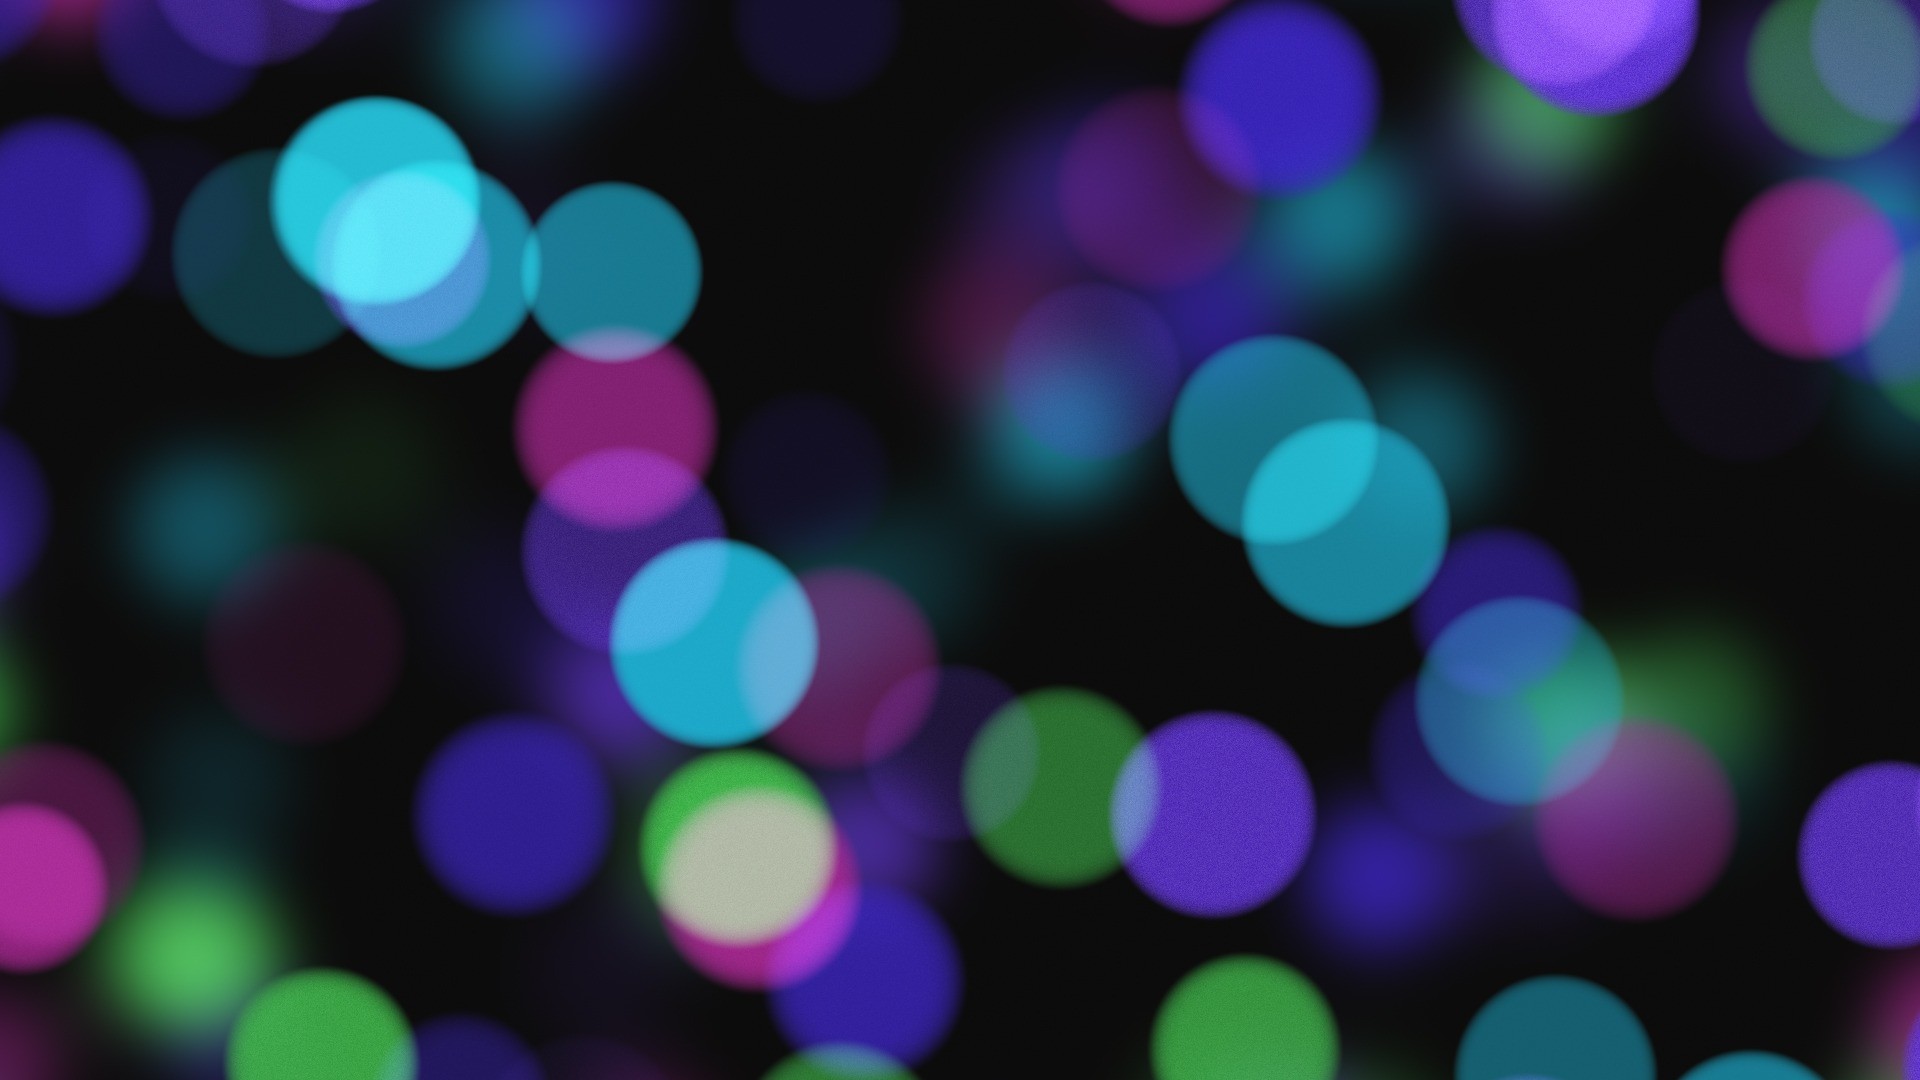 1920x1080 background blurred blue, purple and green lights Â· Free Download